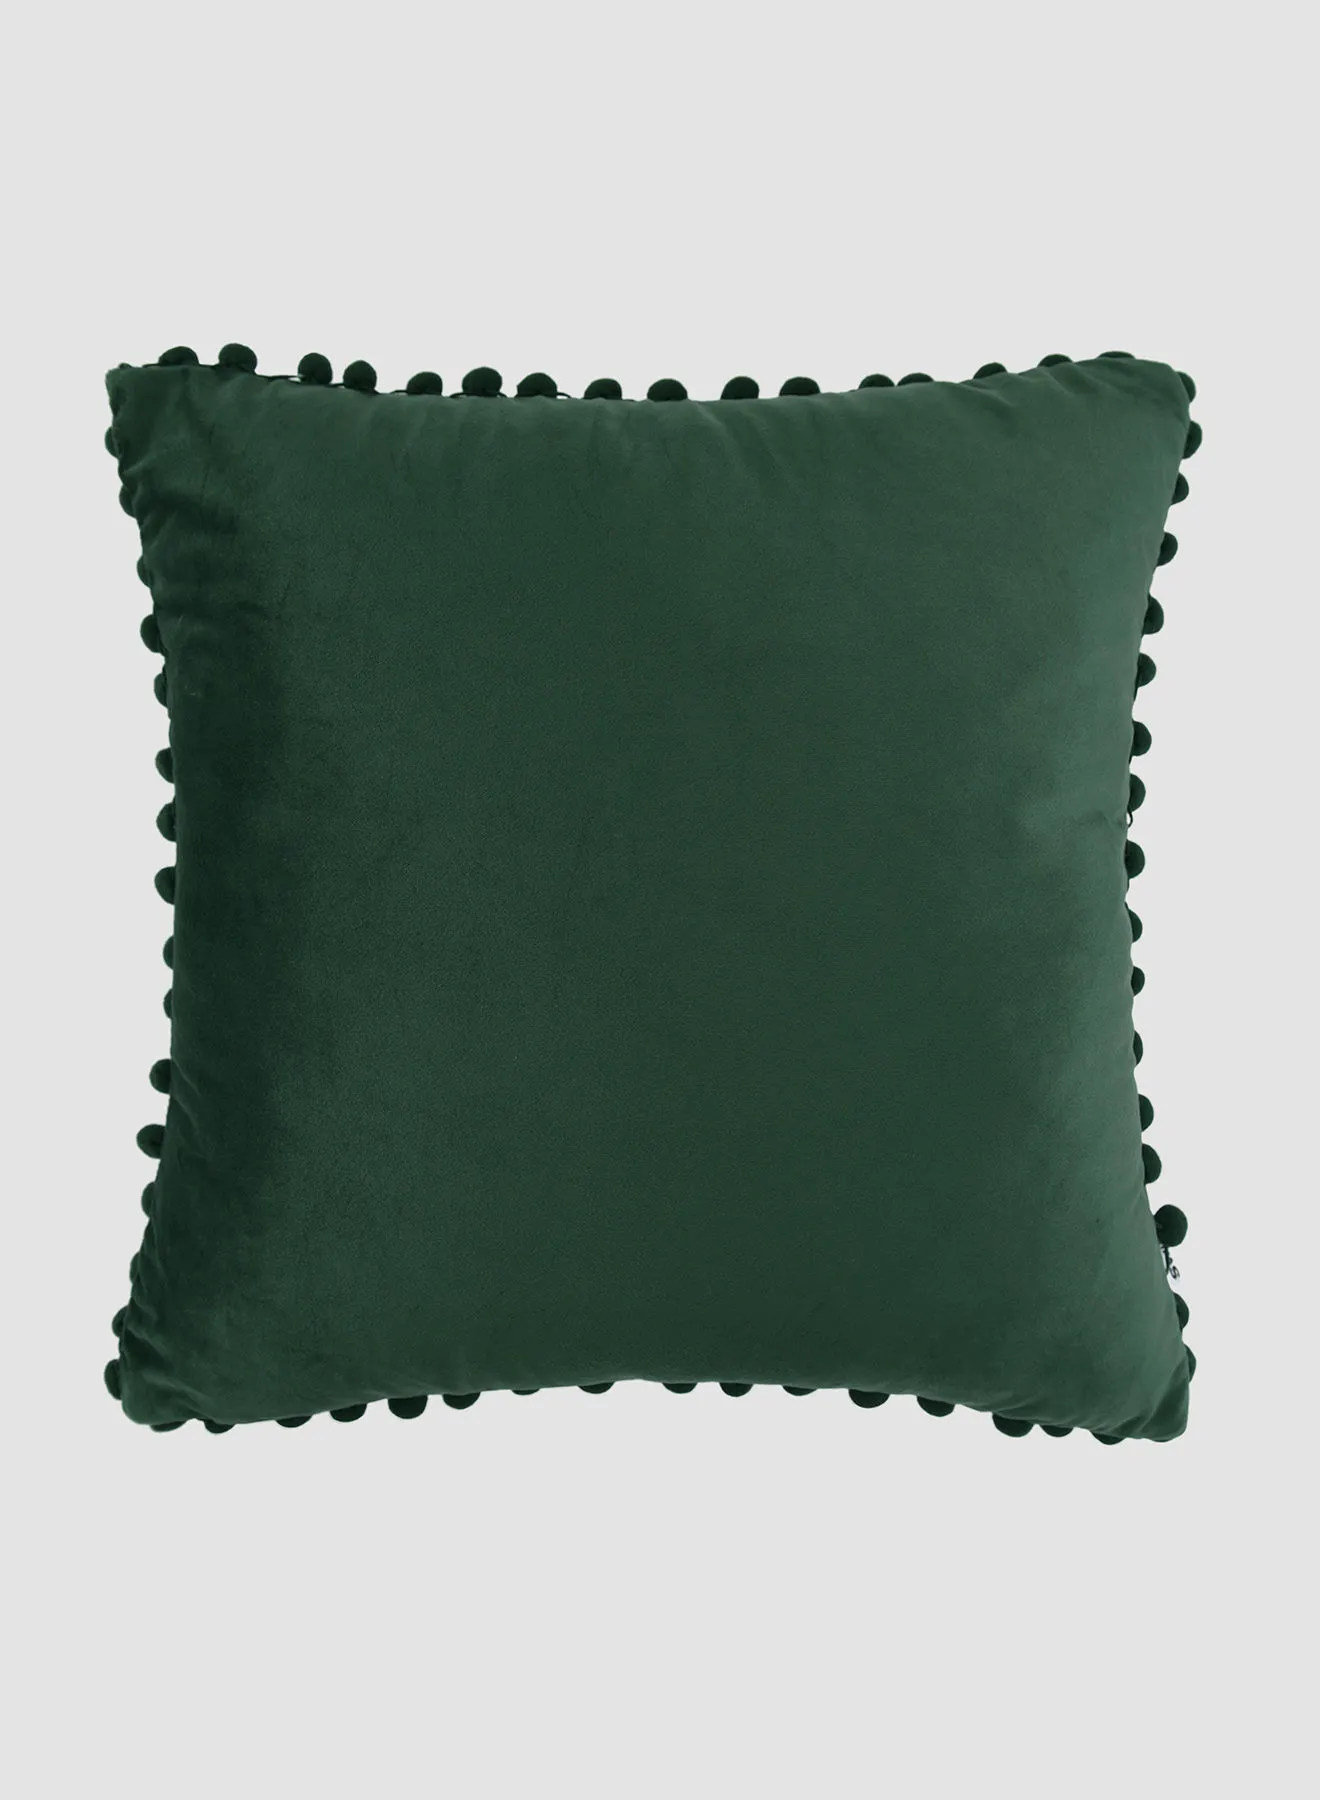 Switch Velvet Cushion  with Pom-poms, Unique Luxury Quality Decor Items for the Perfect Stylish Home Green 45 x 45cm